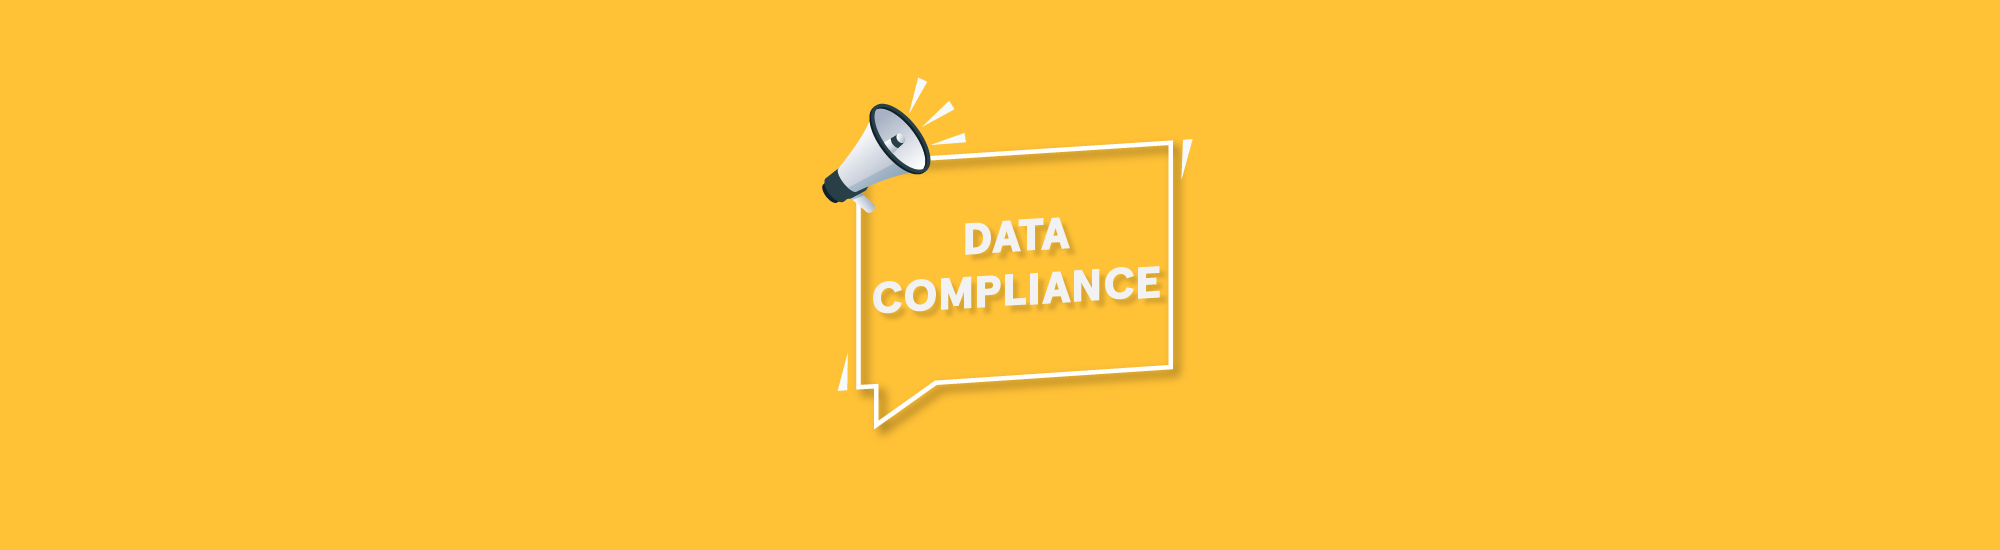 Please read this Data Compliance Statement before you use the system.